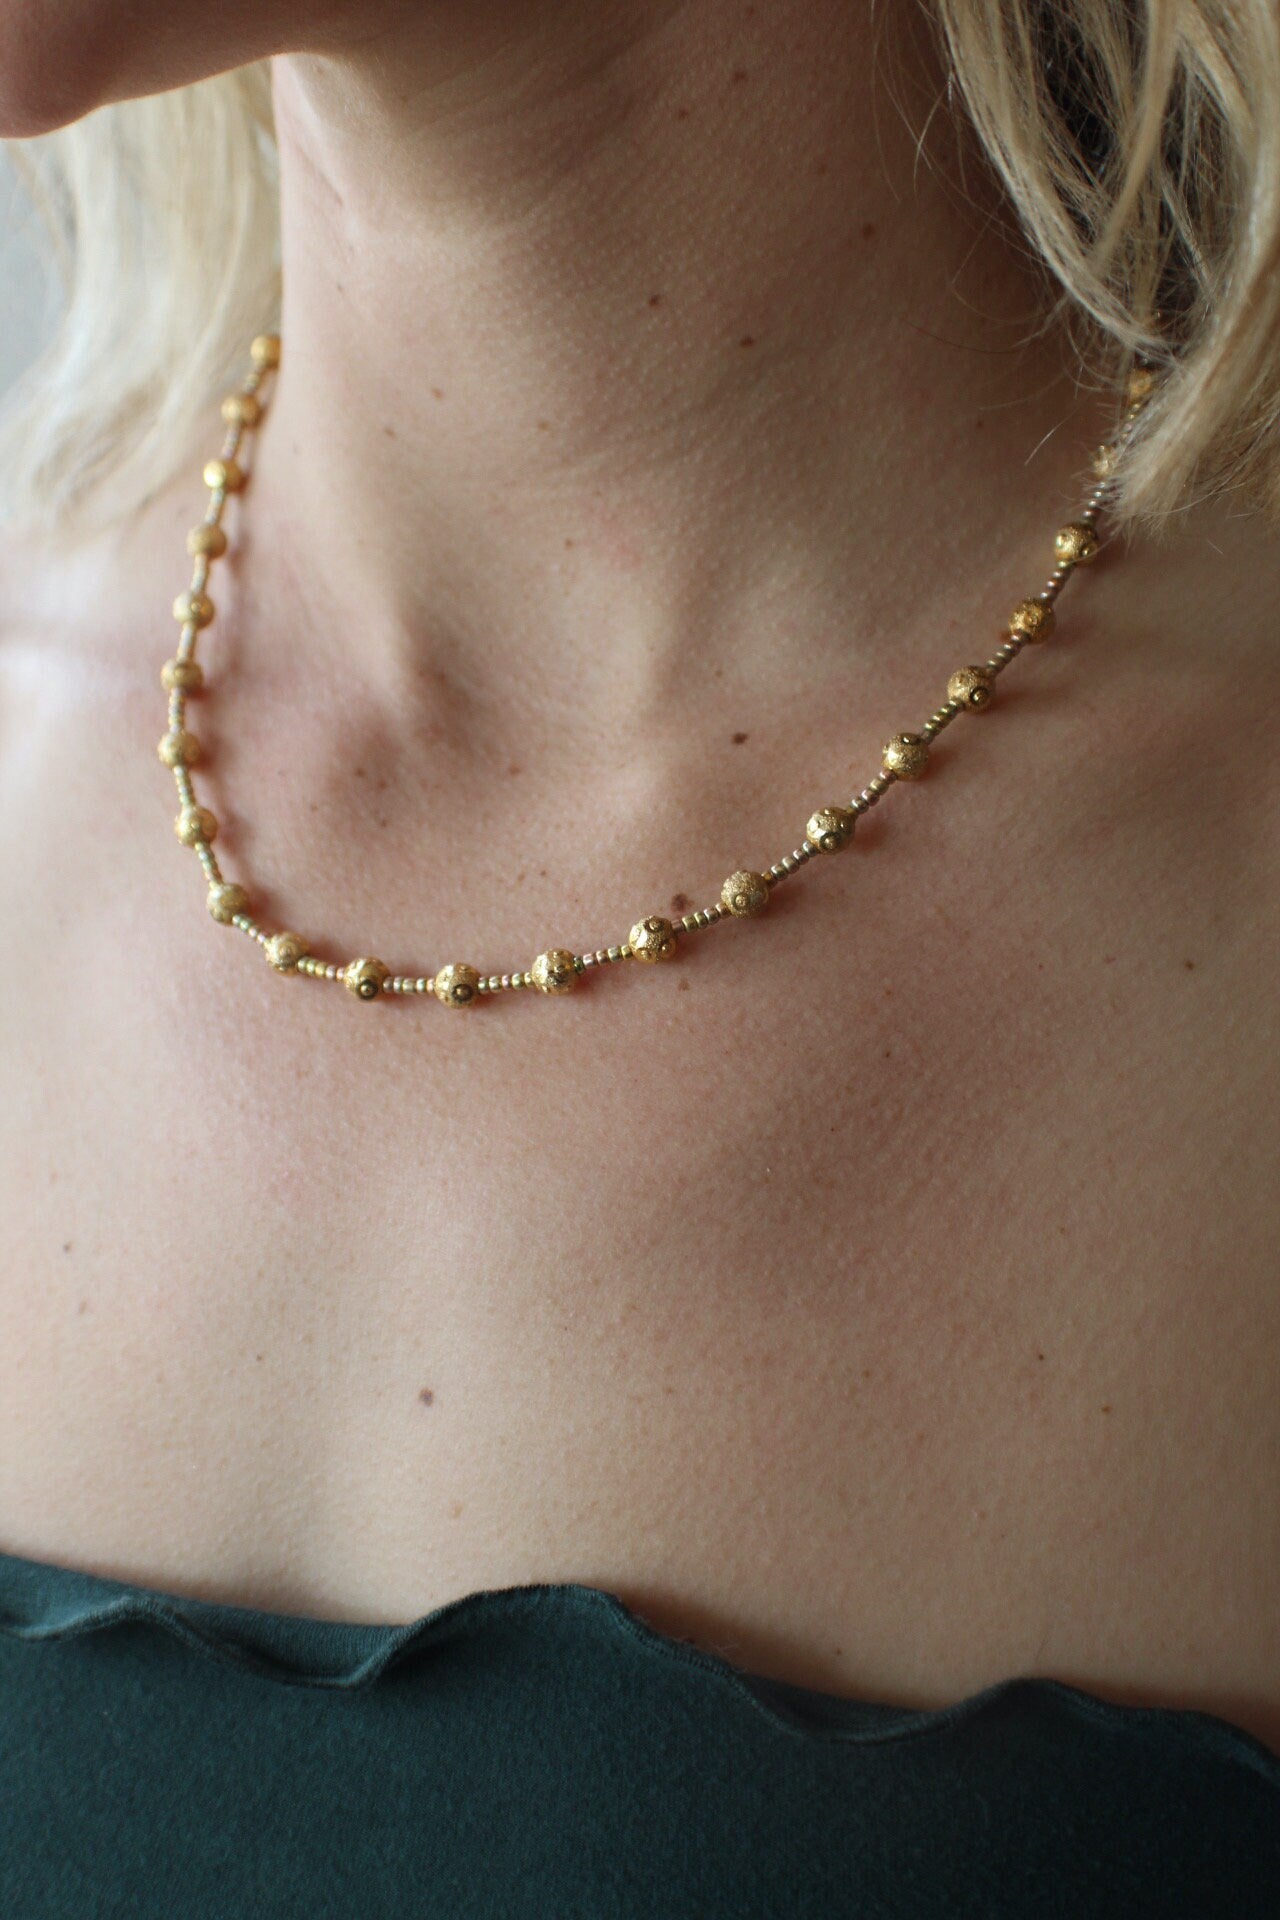 Gorgeous gold satellite beads spaced and accented with gold seed beads. Finished with a quality gold filled clasp.